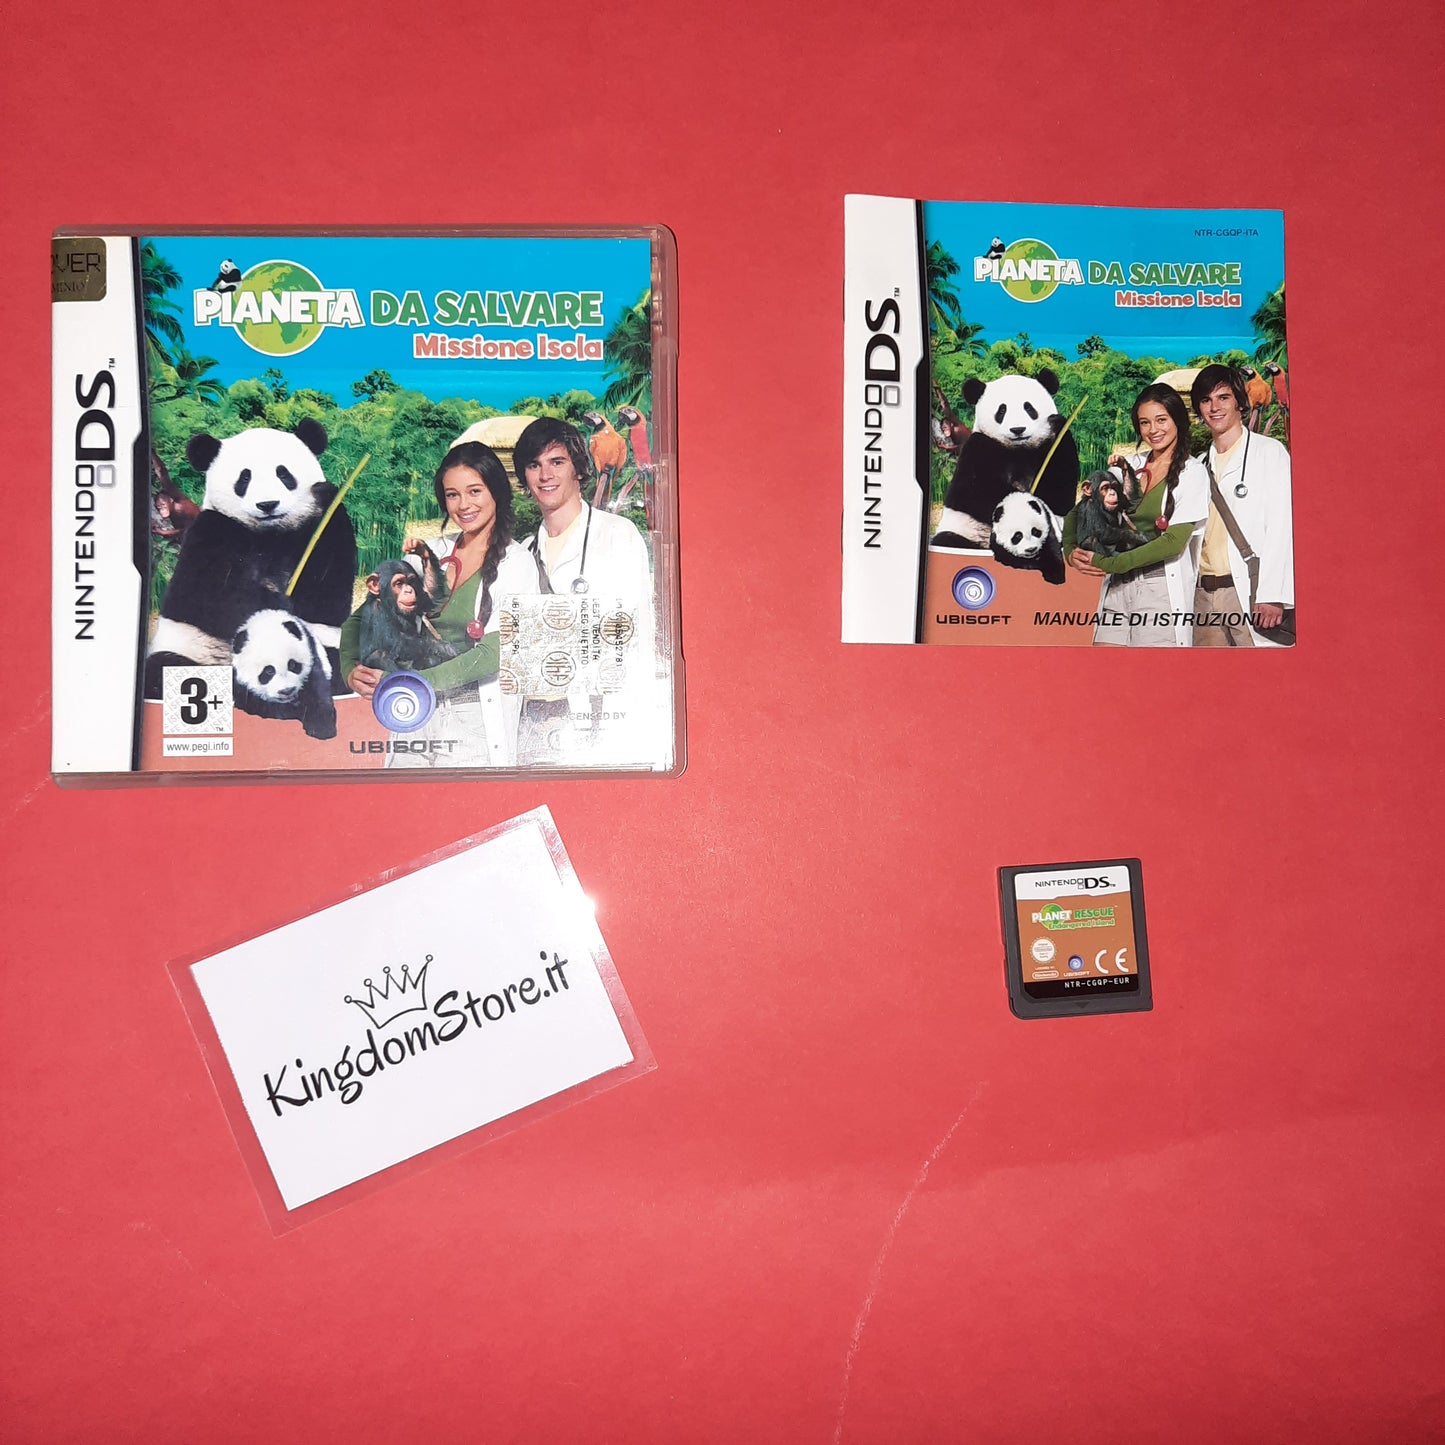 Planet to Save Island Mission - Nintendo DS